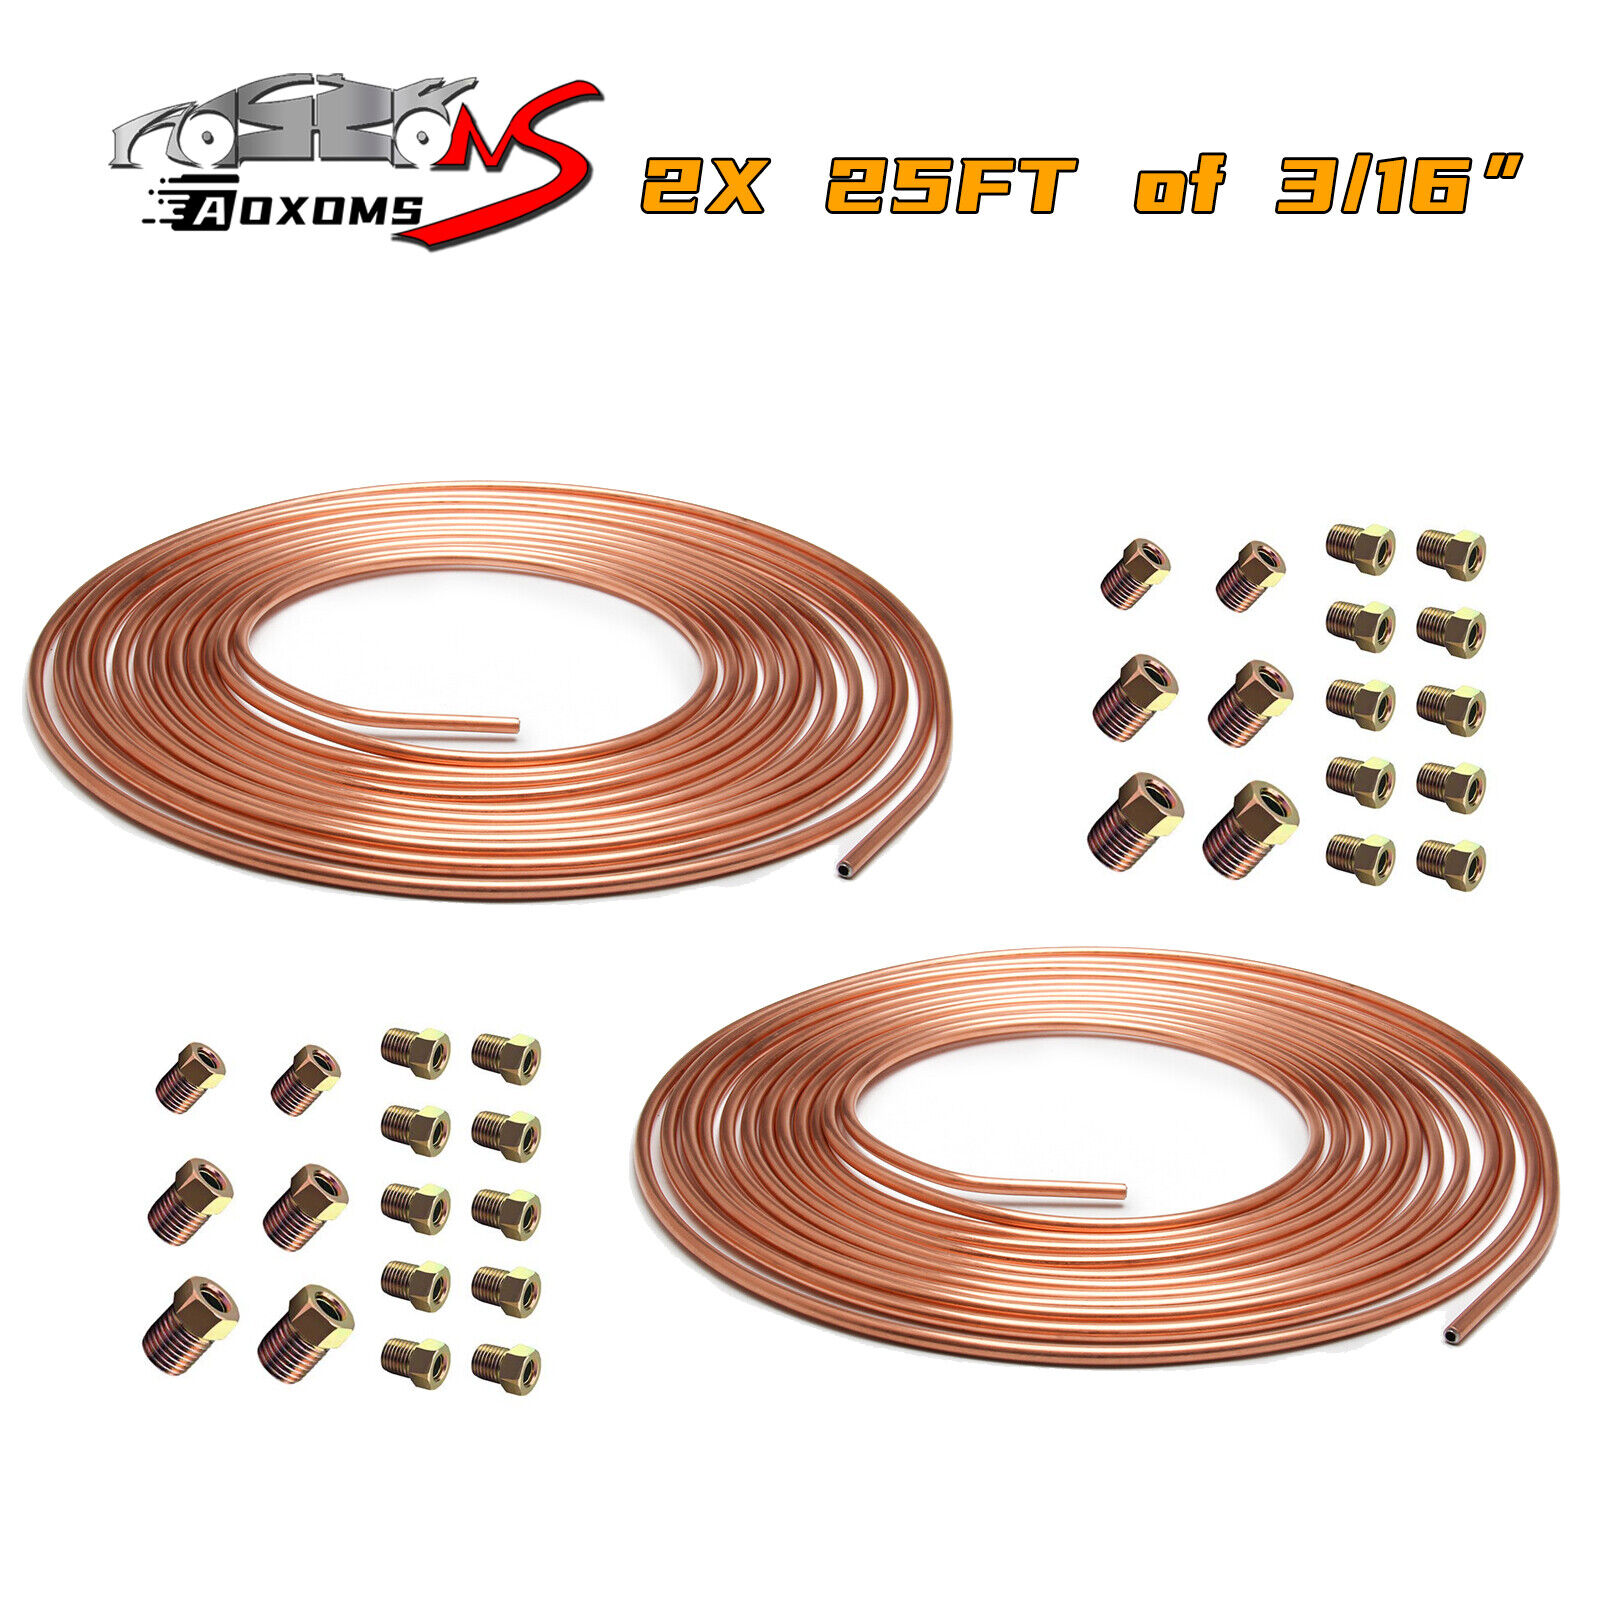 2 x Copper Nickel Brake Line Tubing Kit 3/16 OD 25 FT Coil Roll All Size Fitting